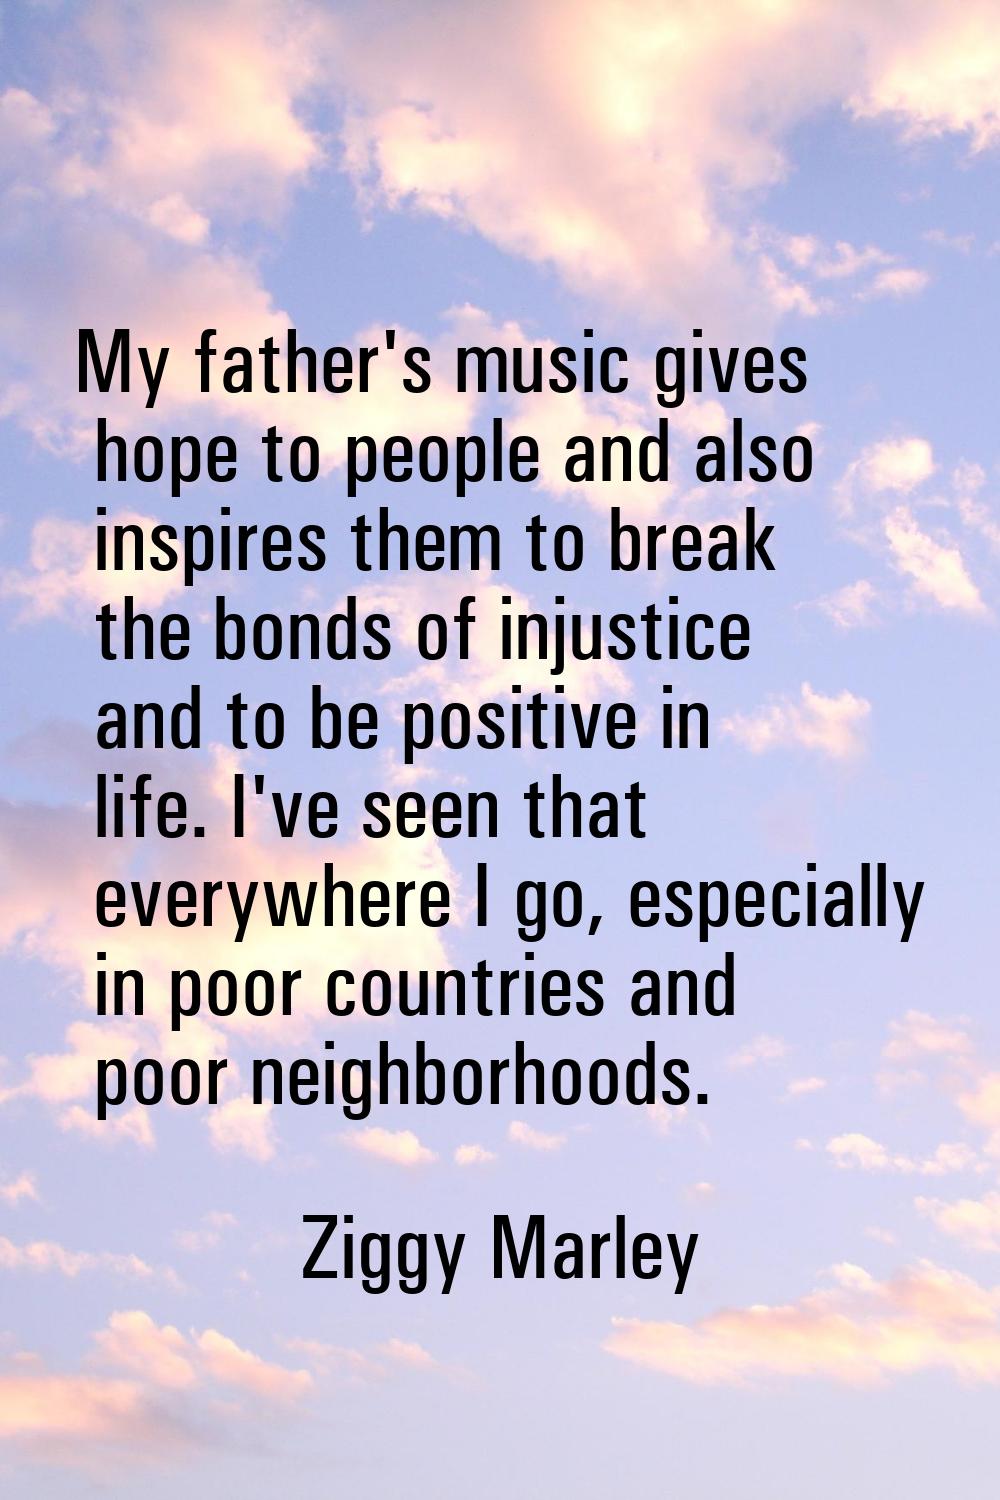 My father's music gives hope to people and also inspires them to break the bonds of injustice and t